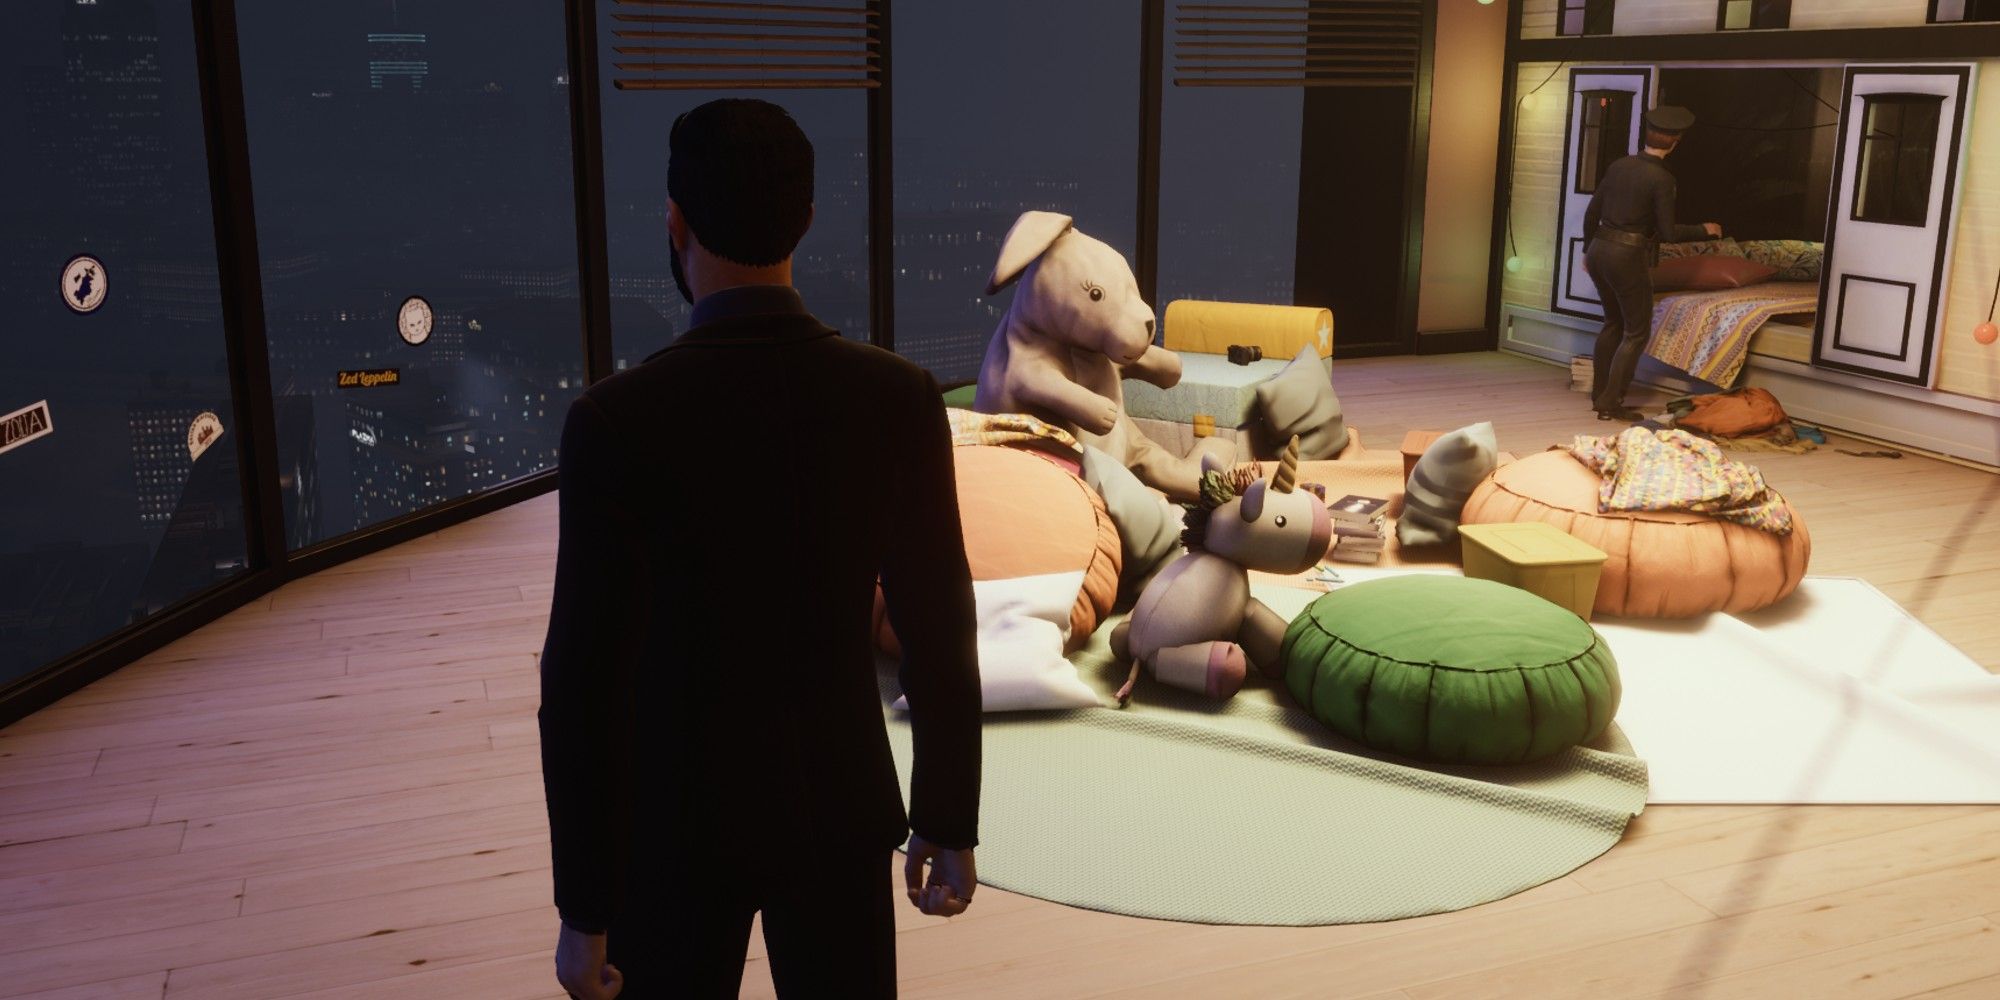 Galeb inspecting a room with stuffed animals and a view of the city in Vampire: The Masquerade - Swansong